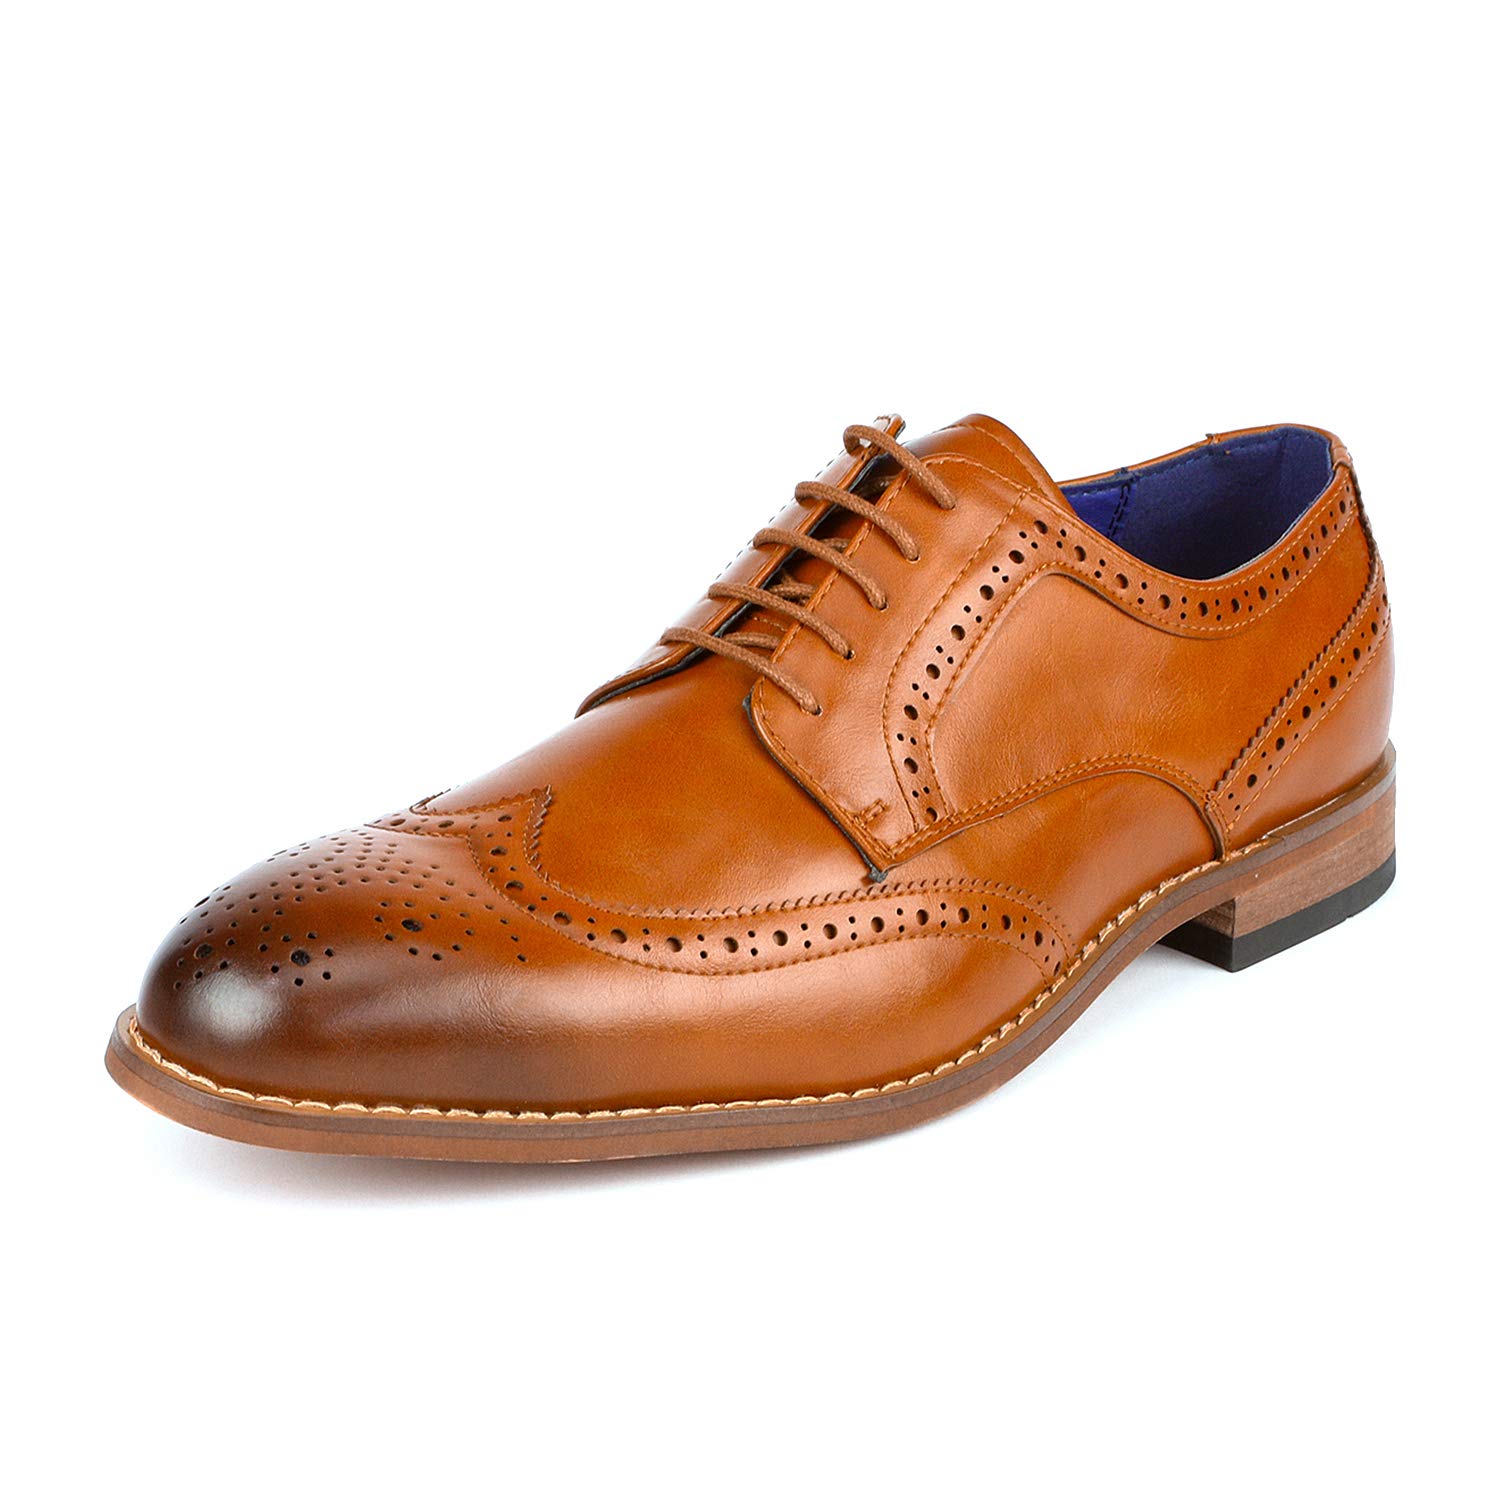 Bruno Marc Mens Brogue Oxford Shoes Lace up Wing Tip Dress Shoes Casual Shoes WILLIAM_2 CAMEL Size 9 - image 1 of 5